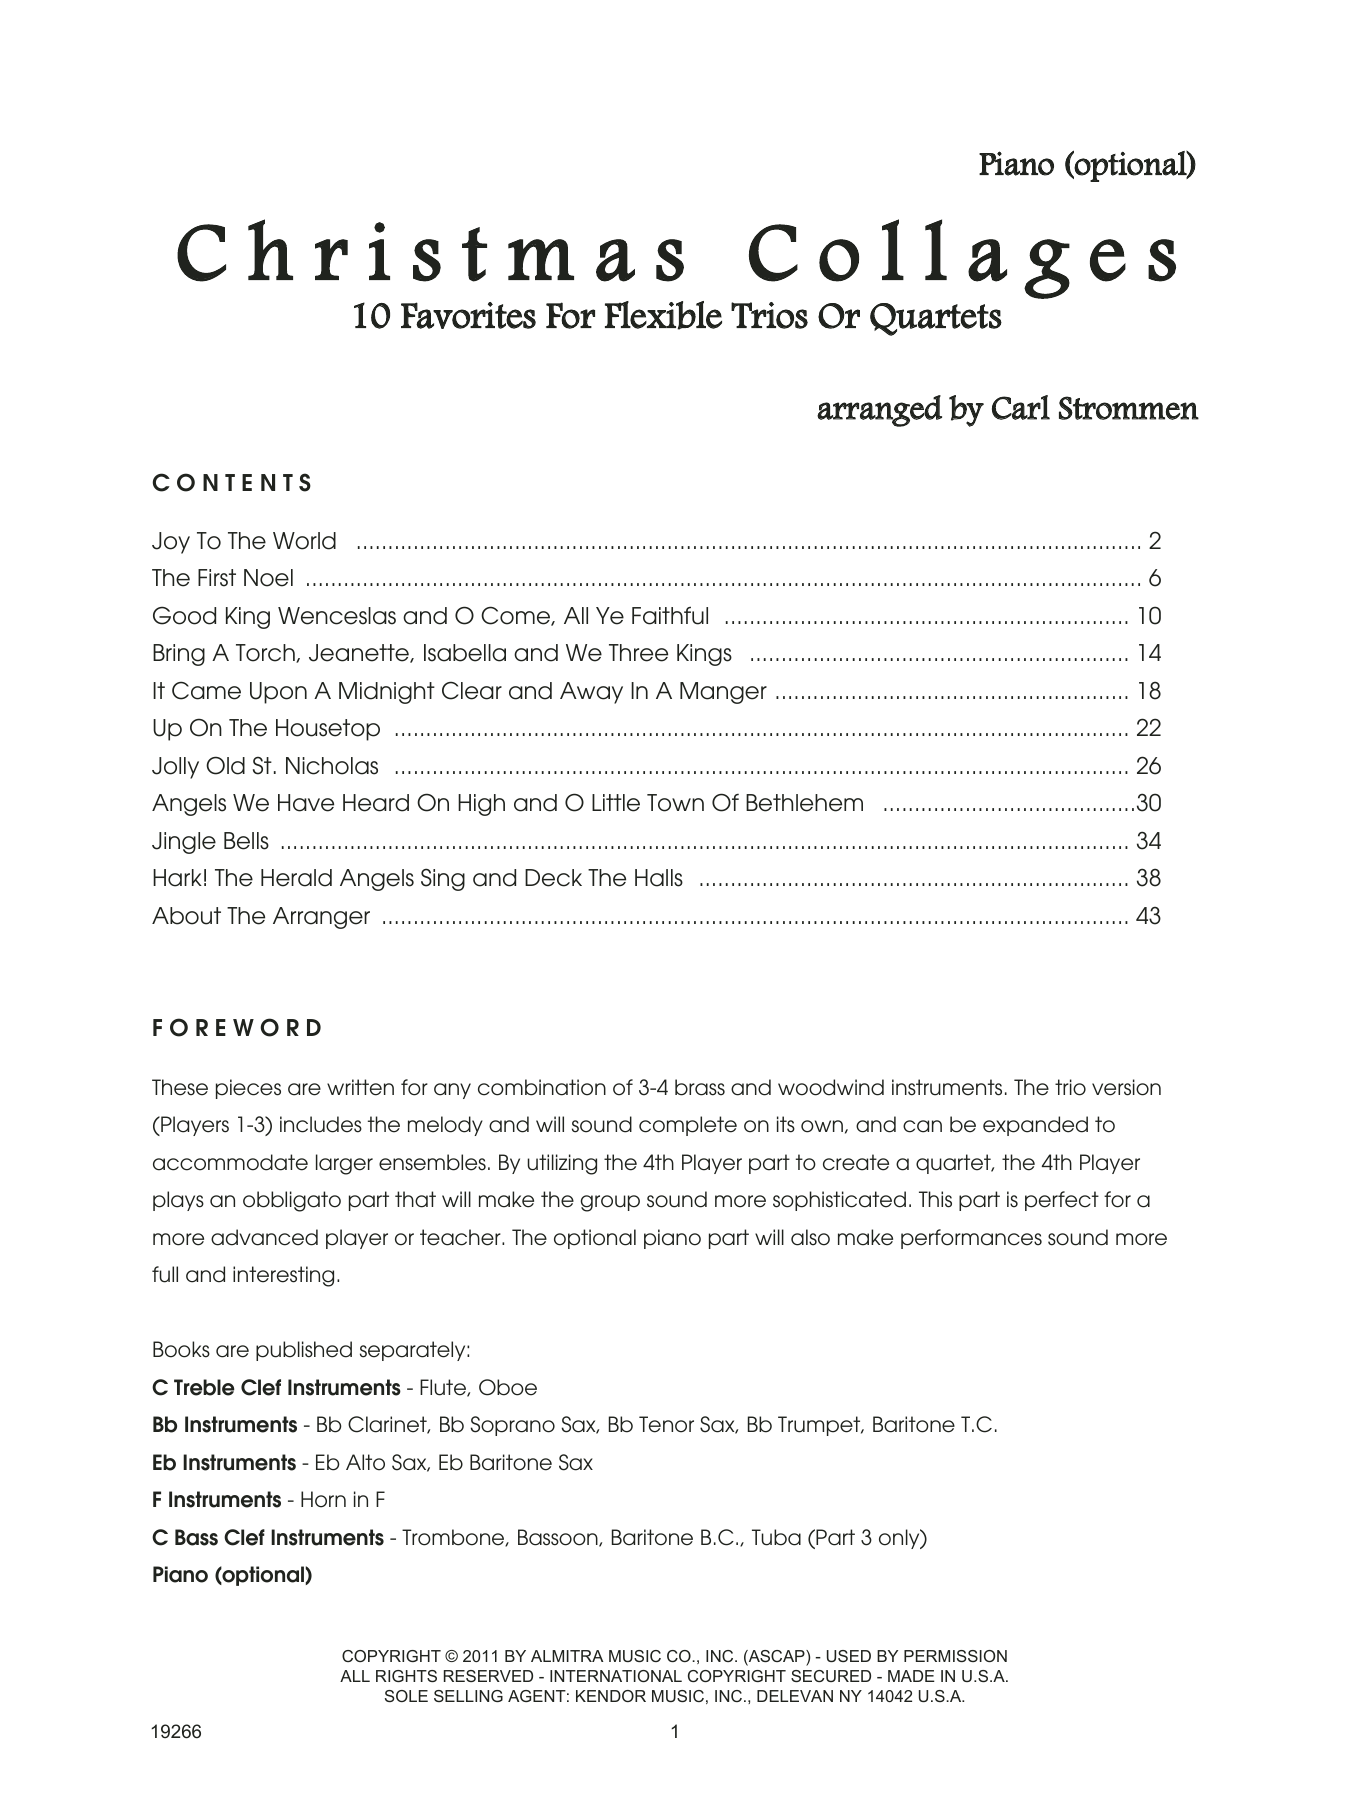 Download Strommen Christmas Collages - Piano (optional) Sheet Music